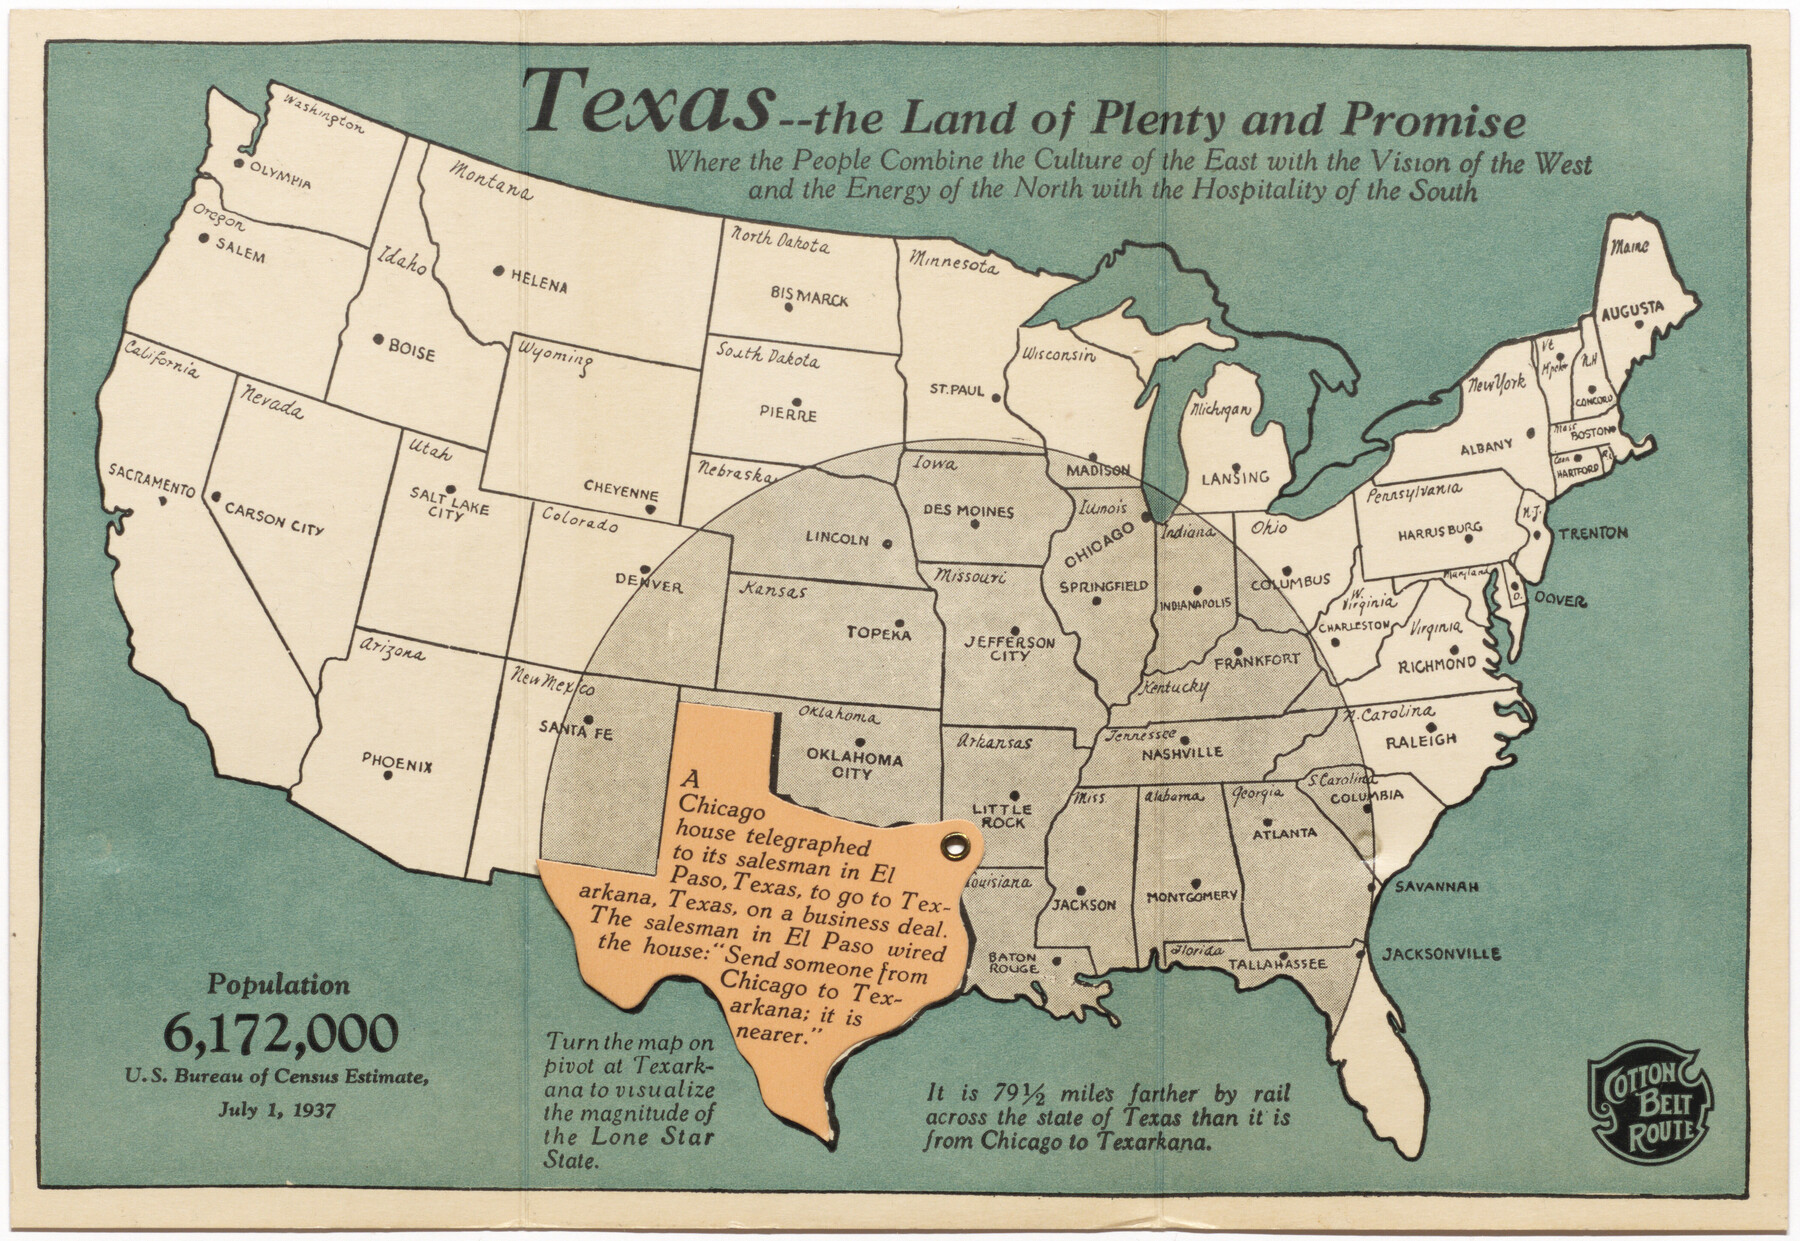 96596, Texas - the Land of Plenty and Promise where the People Combine the Culture of the East with the Vision of the West and the Energy of the North with the Hospitality of the South, Cobb Digital Map Collection - 1